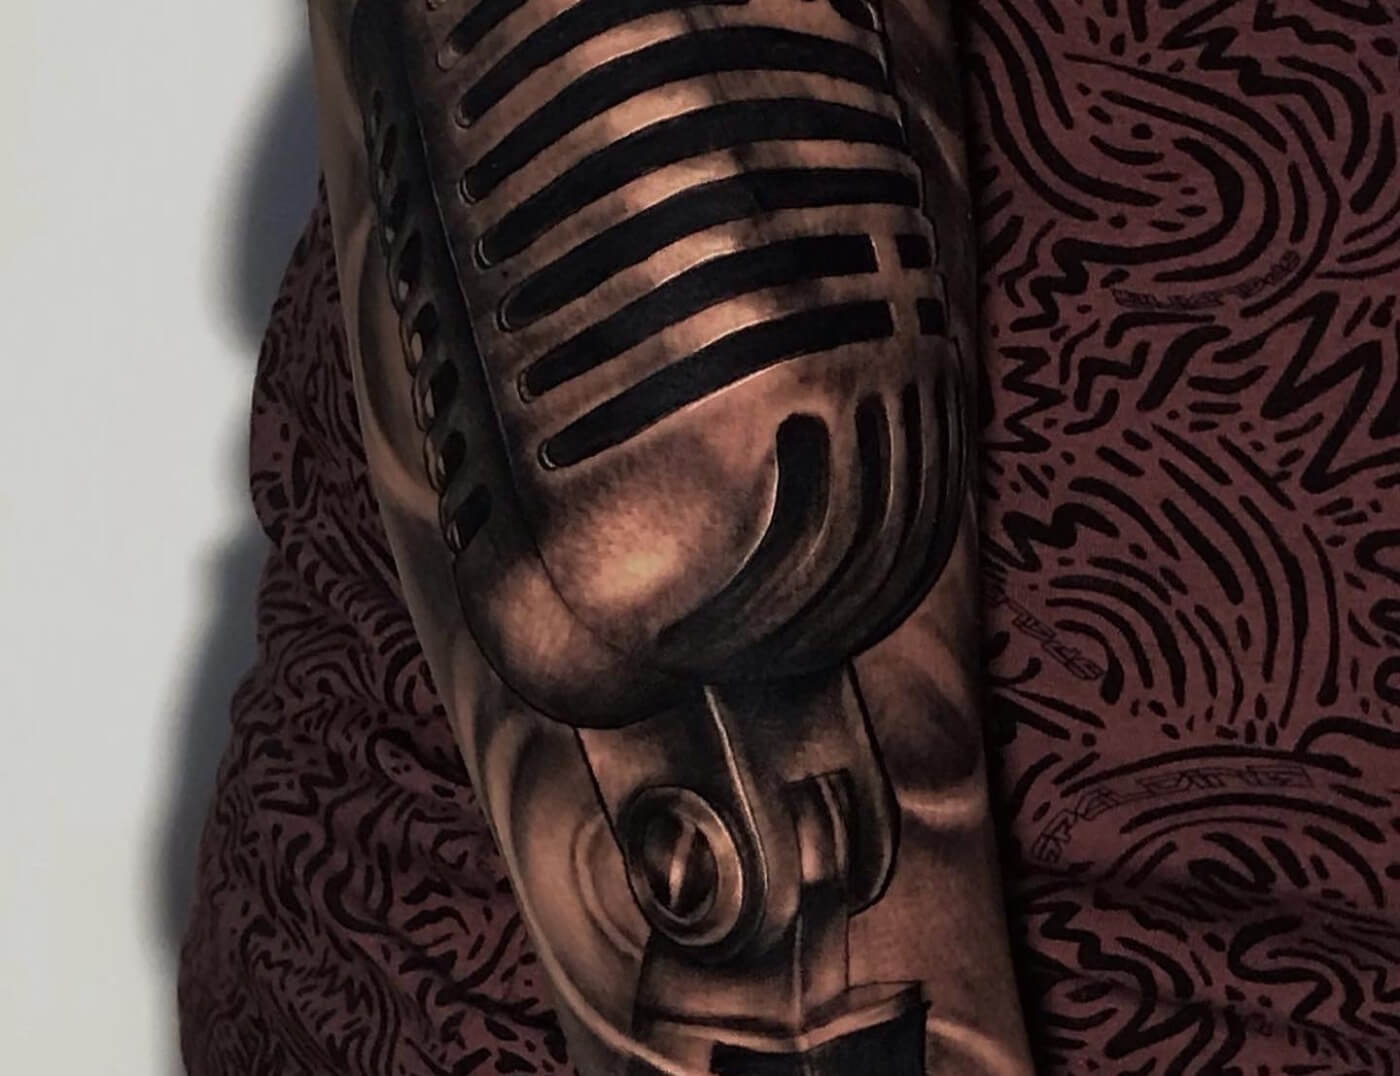 Music Microphone Sleeve Black & Grey Tattoo By Rene Cristobal, A Guest Tattoo Artist At Iron Palm Tattoos In Atlanta. Rene is from Vision Tattoo Studio in Concepcion, Chile and is booking for July 3rd - July 16th, 2023. We're open late night until 2AM. Call 404-973-7828 or stop by for a free consultation. Walk Ins are welcome.